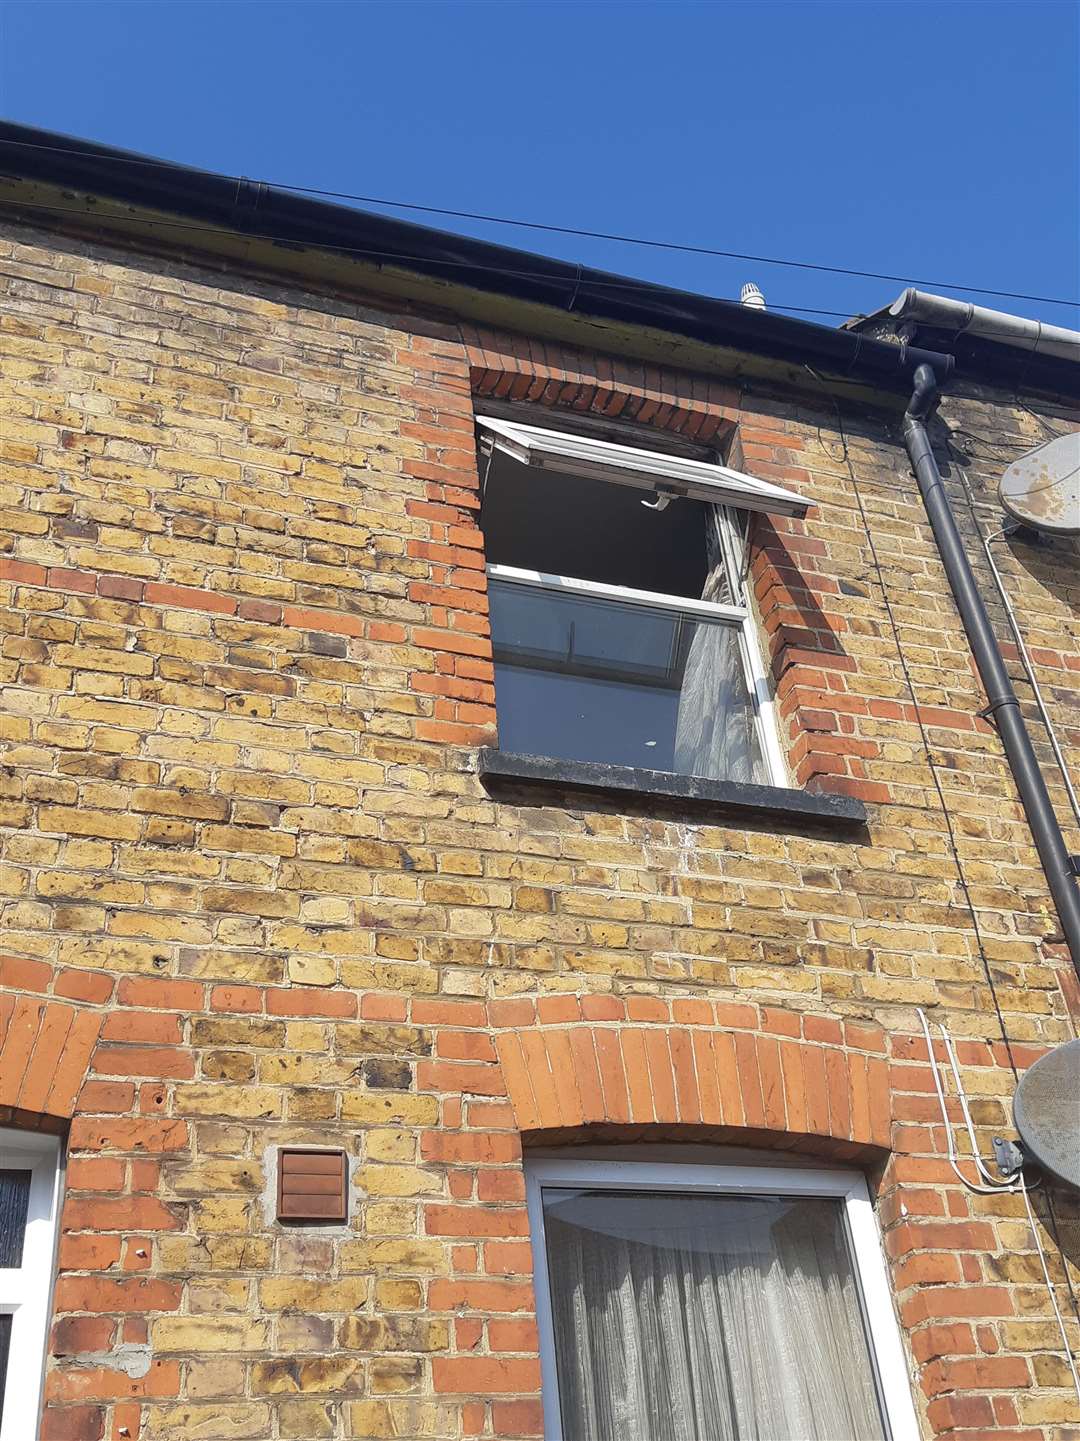 Two fire crews were called to this property in Kings Street, Gillingham at 6.30am (8146309)